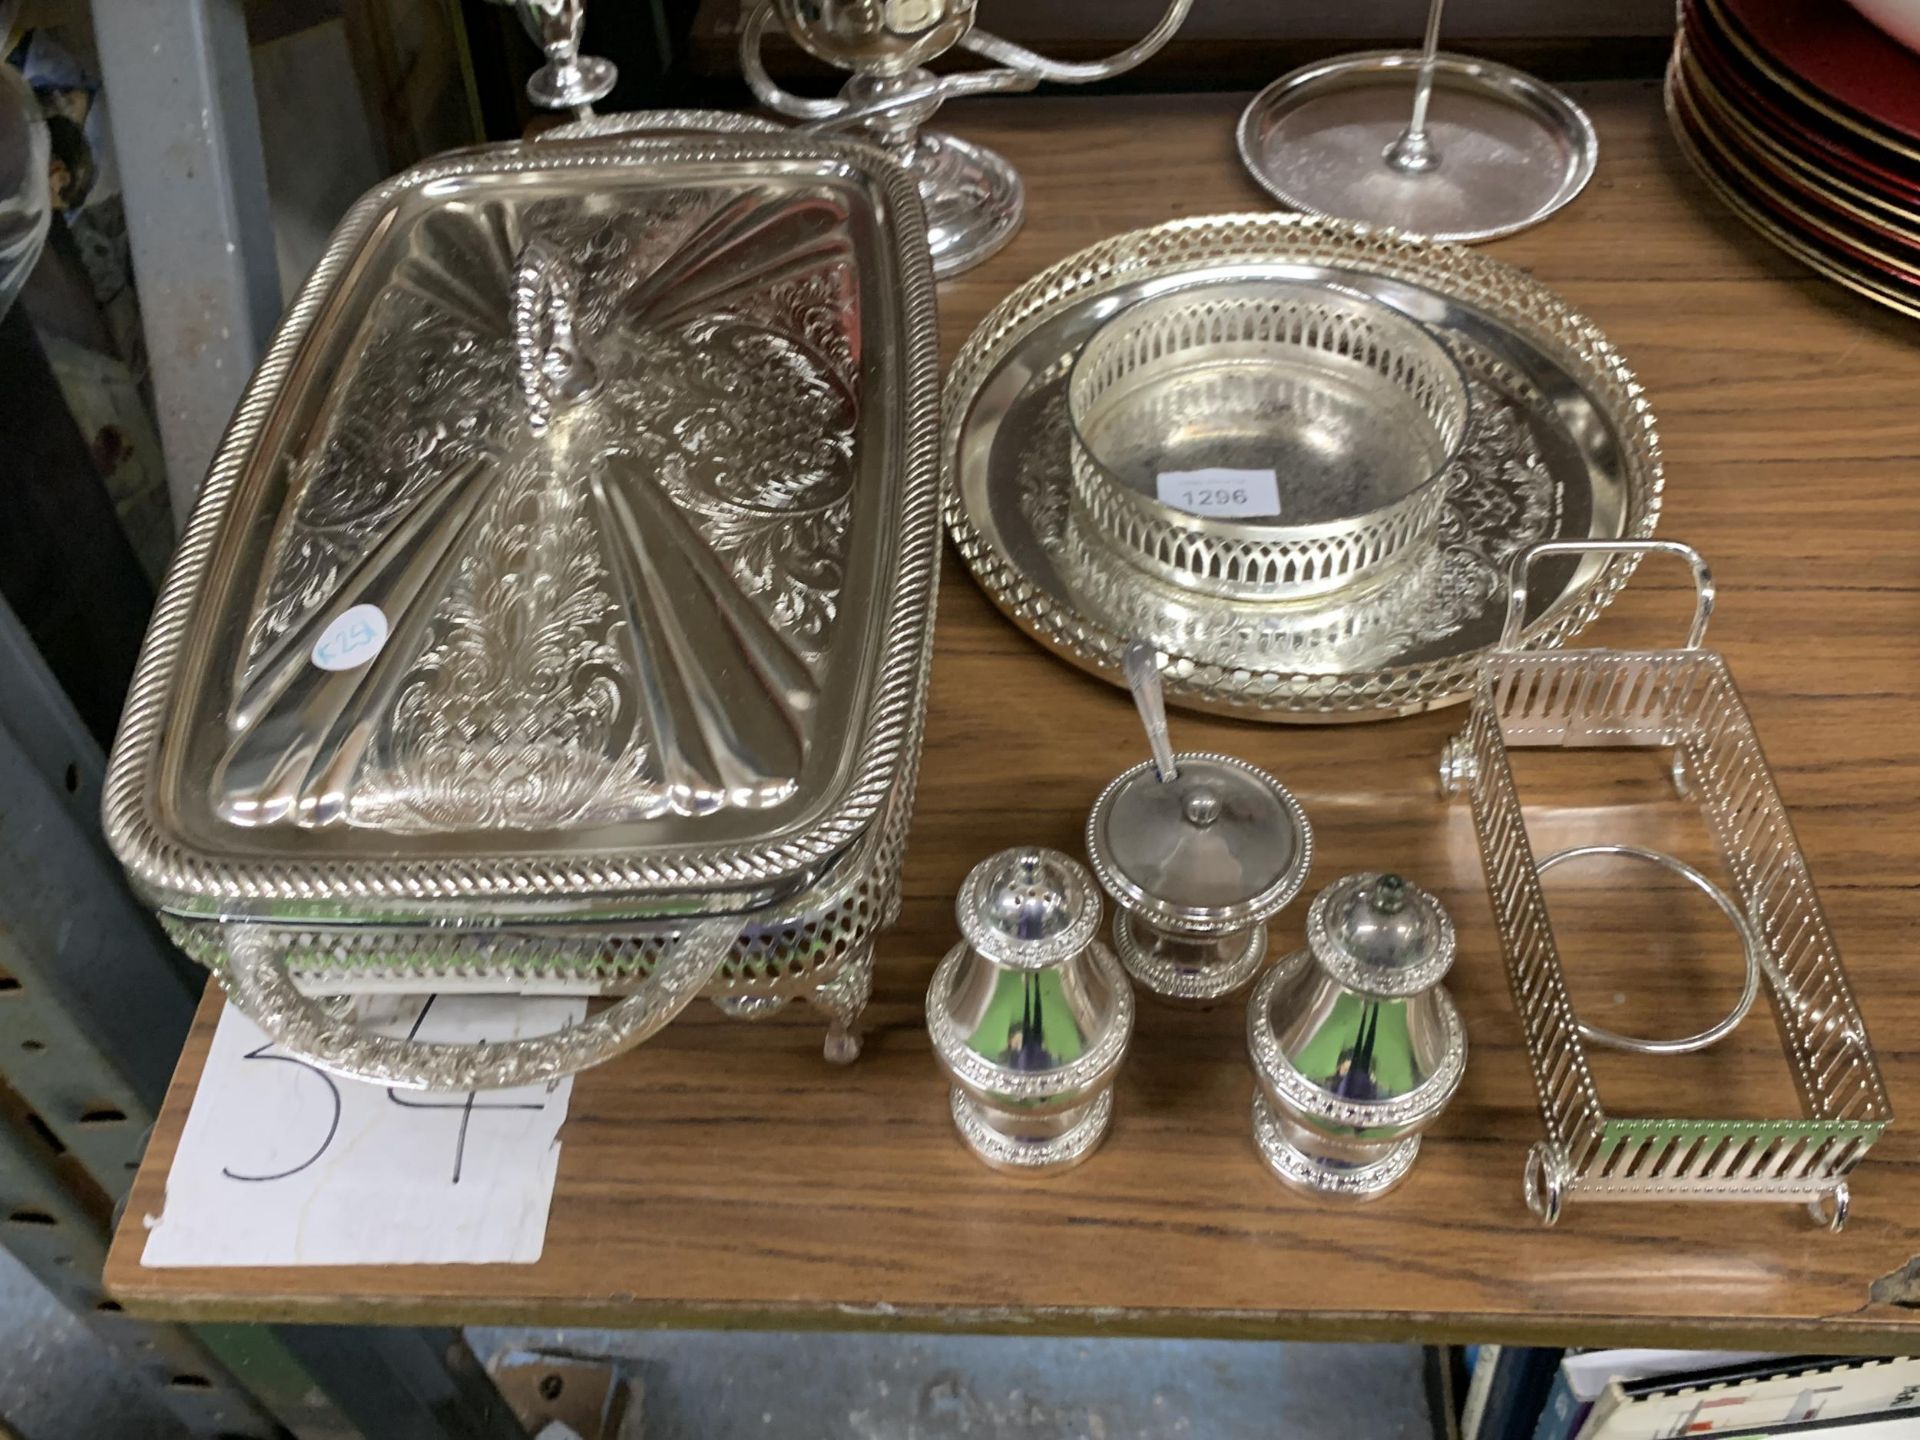 A QUANTITY OF SILVER PLATED ITEMS TO INCLUDE A SERVING DISH, CANDLEABRA, CRUET SET, TRAYS, ETC - Image 2 of 3